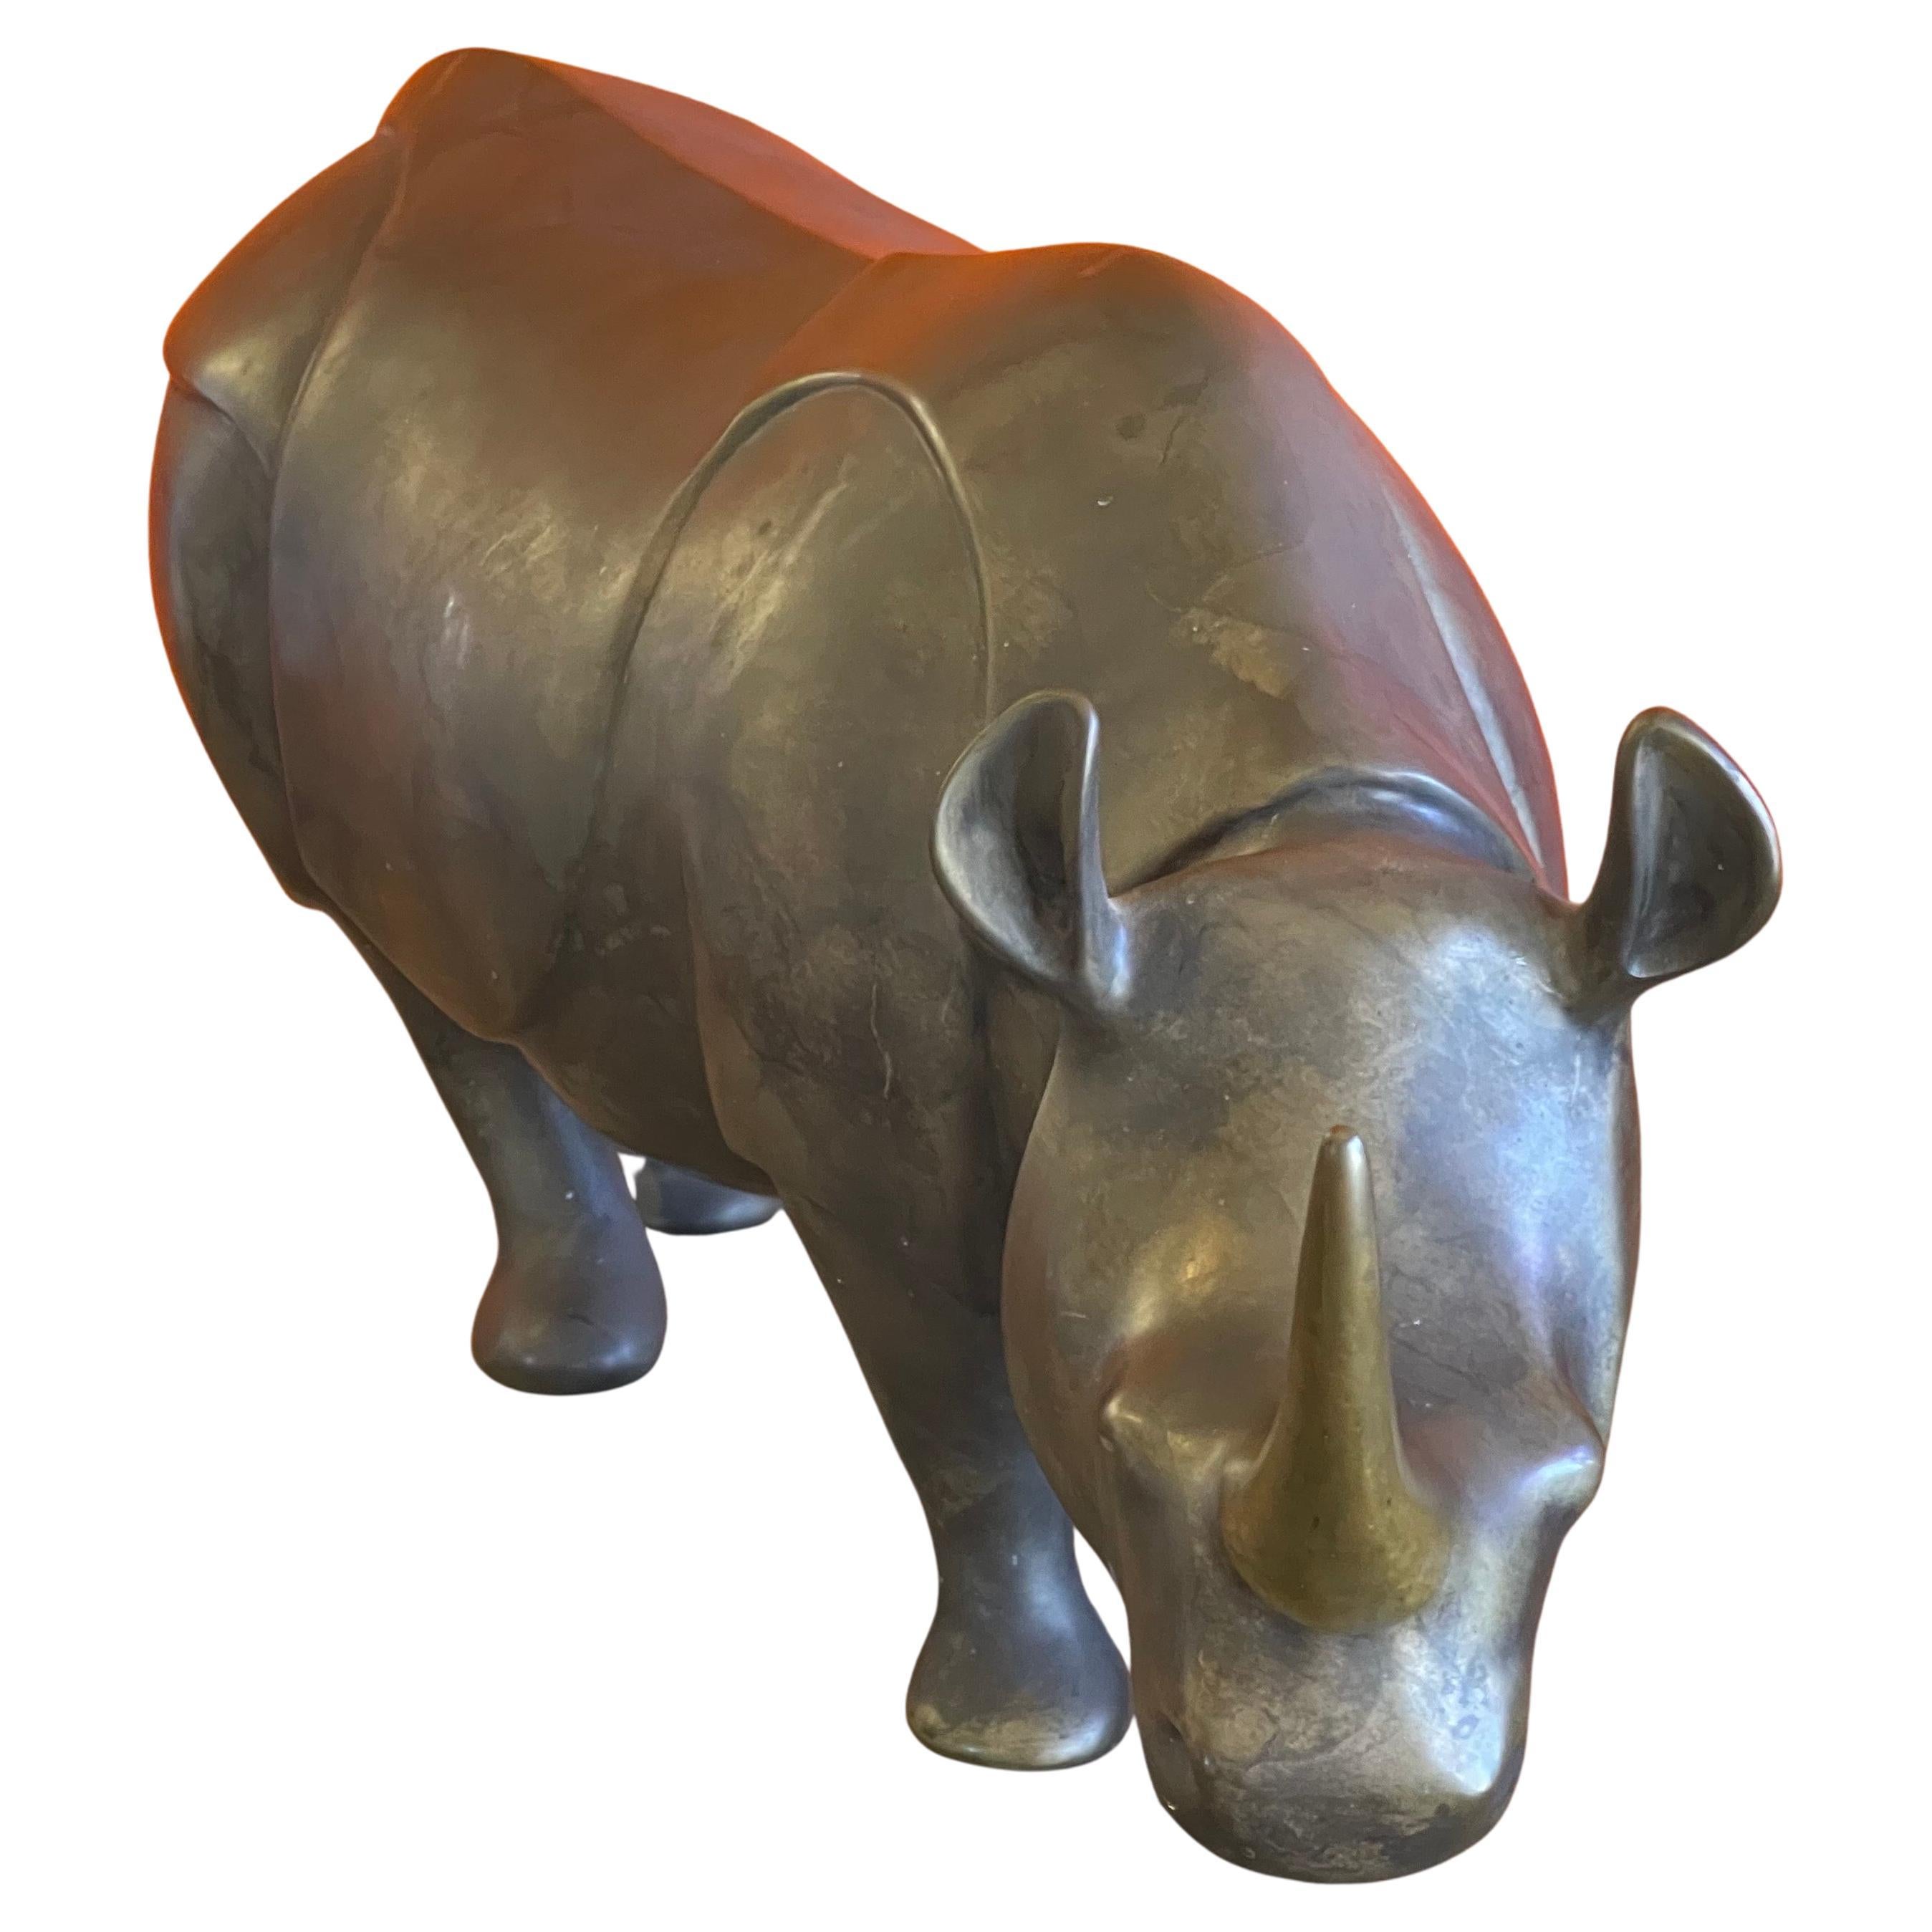 Massive bronze artist proof (AP) rhinoceros sculpture by Loet Vanderveen circa 1980s. The piece is in very good vintage condition with a wonderful patina and measures a substantial 17